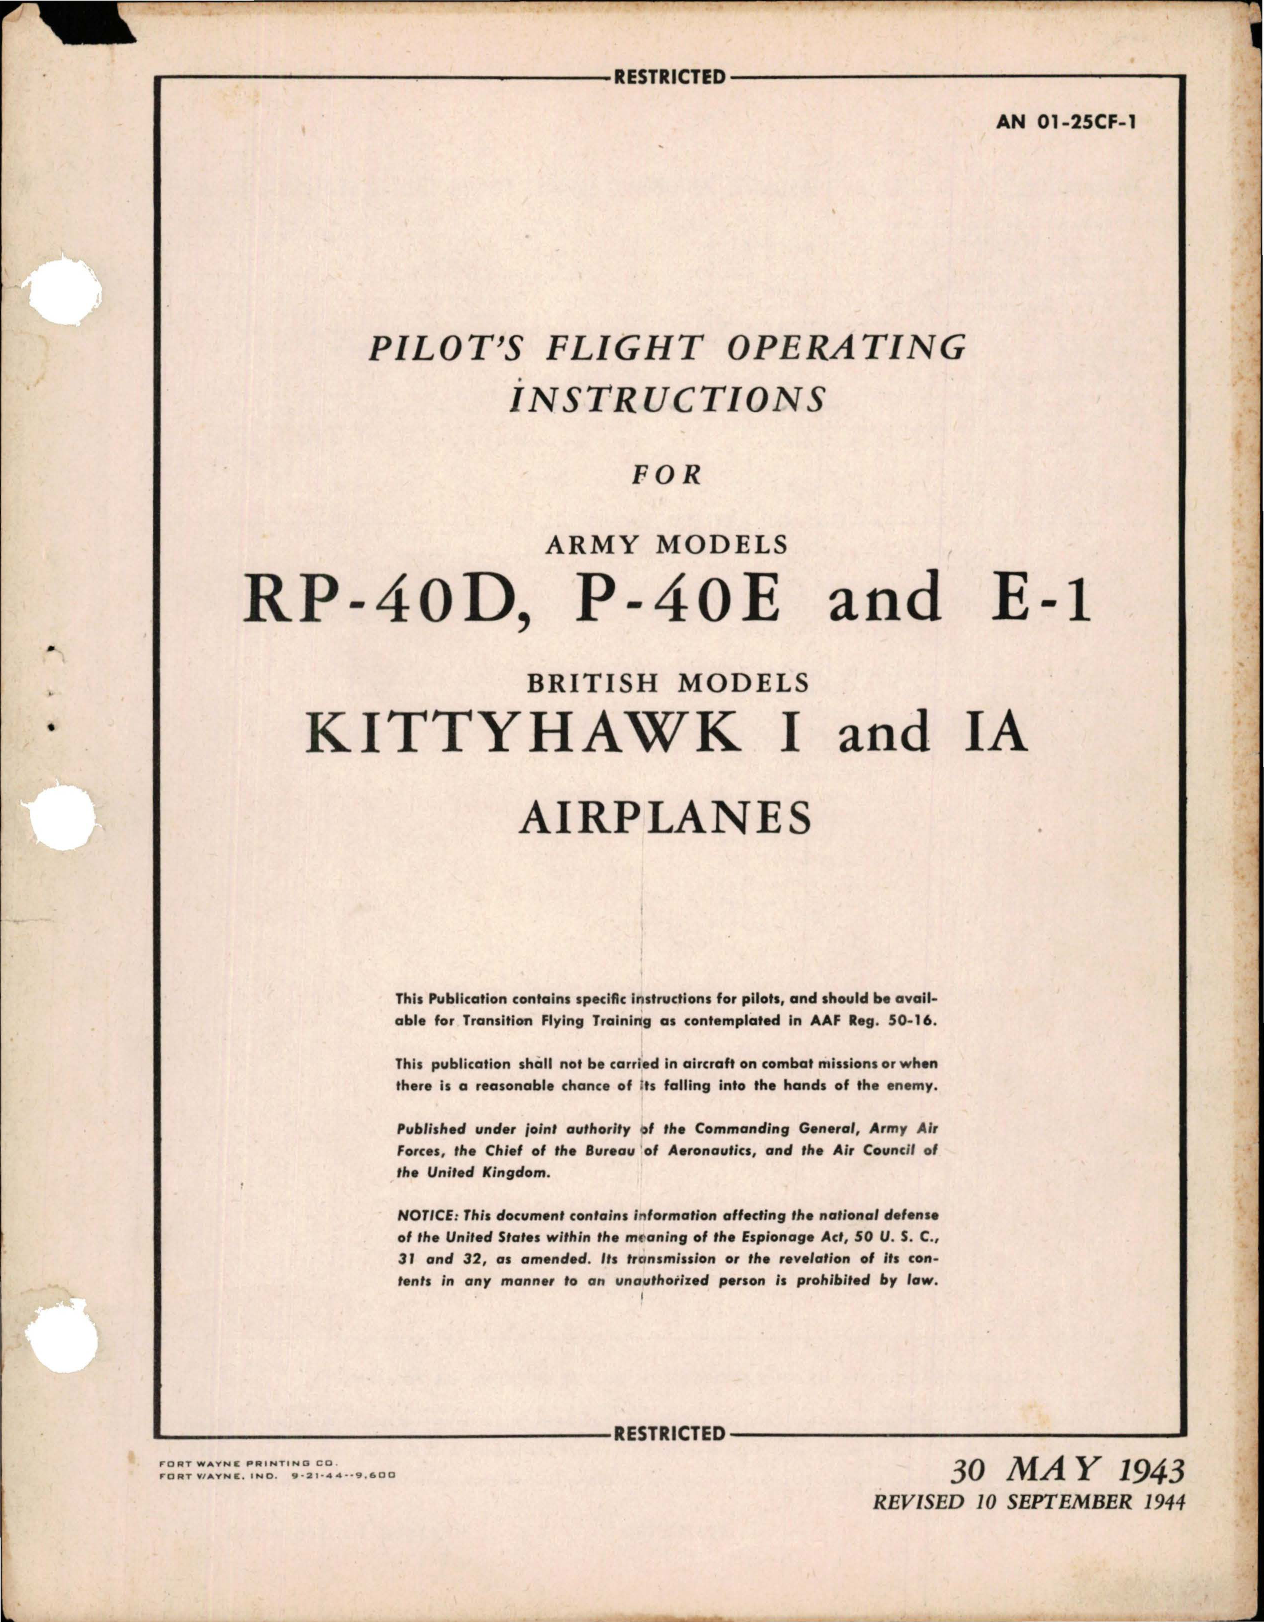 Sample page 1 from AirCorps Library document: Pilot's Flight Operating Instructions for P-40D, P-40E, P-40E-1, Kittyhawk I, and Kittyhawk IA